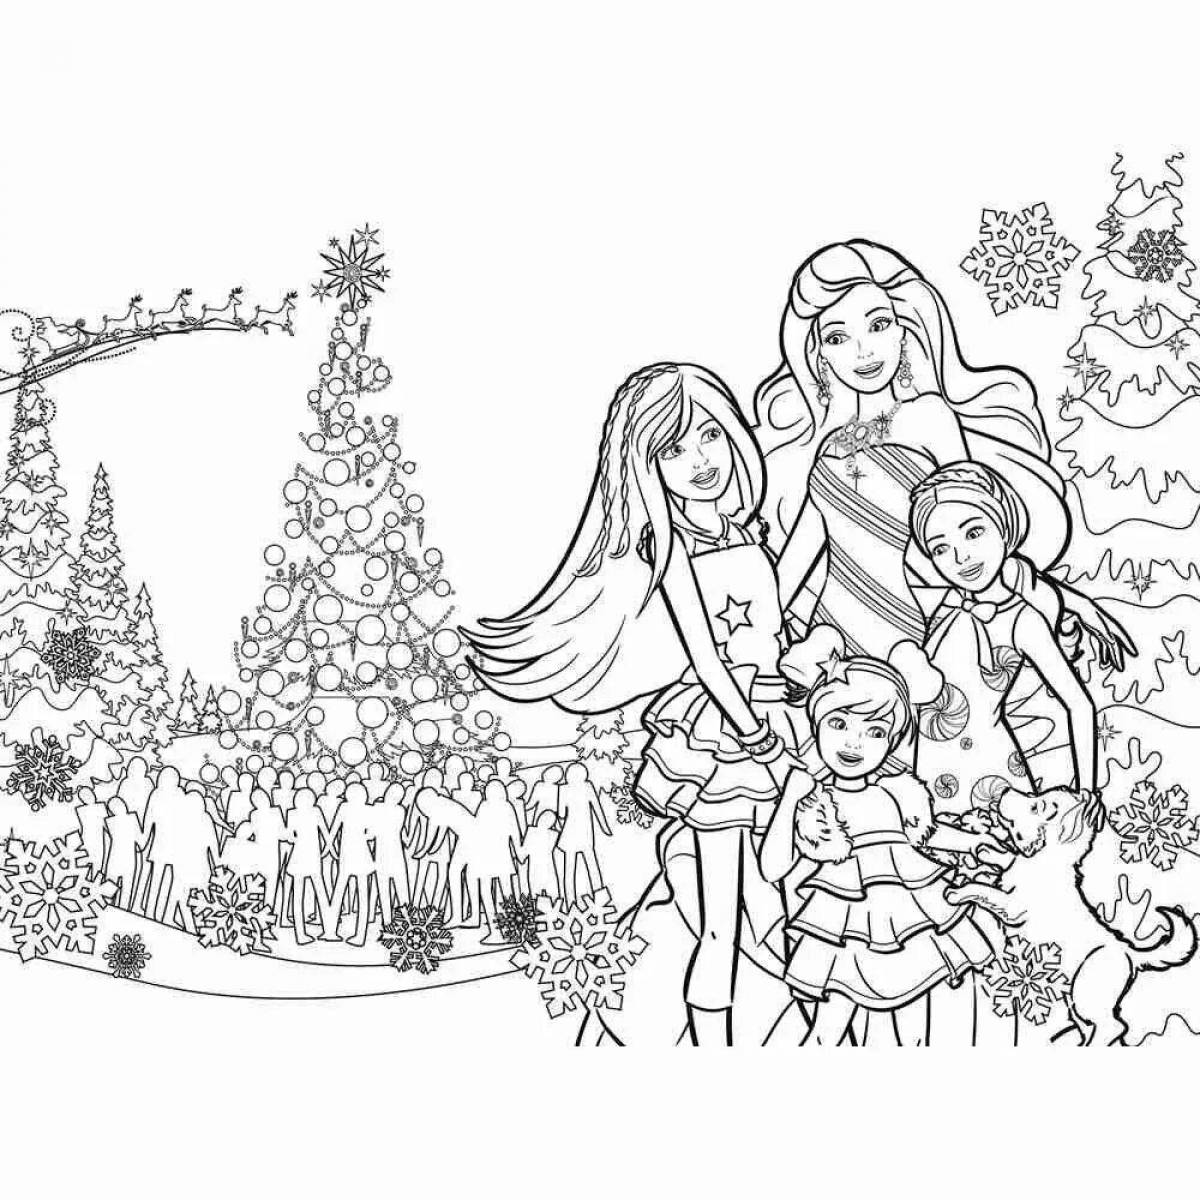 Barbie's charming Christmas coloring book